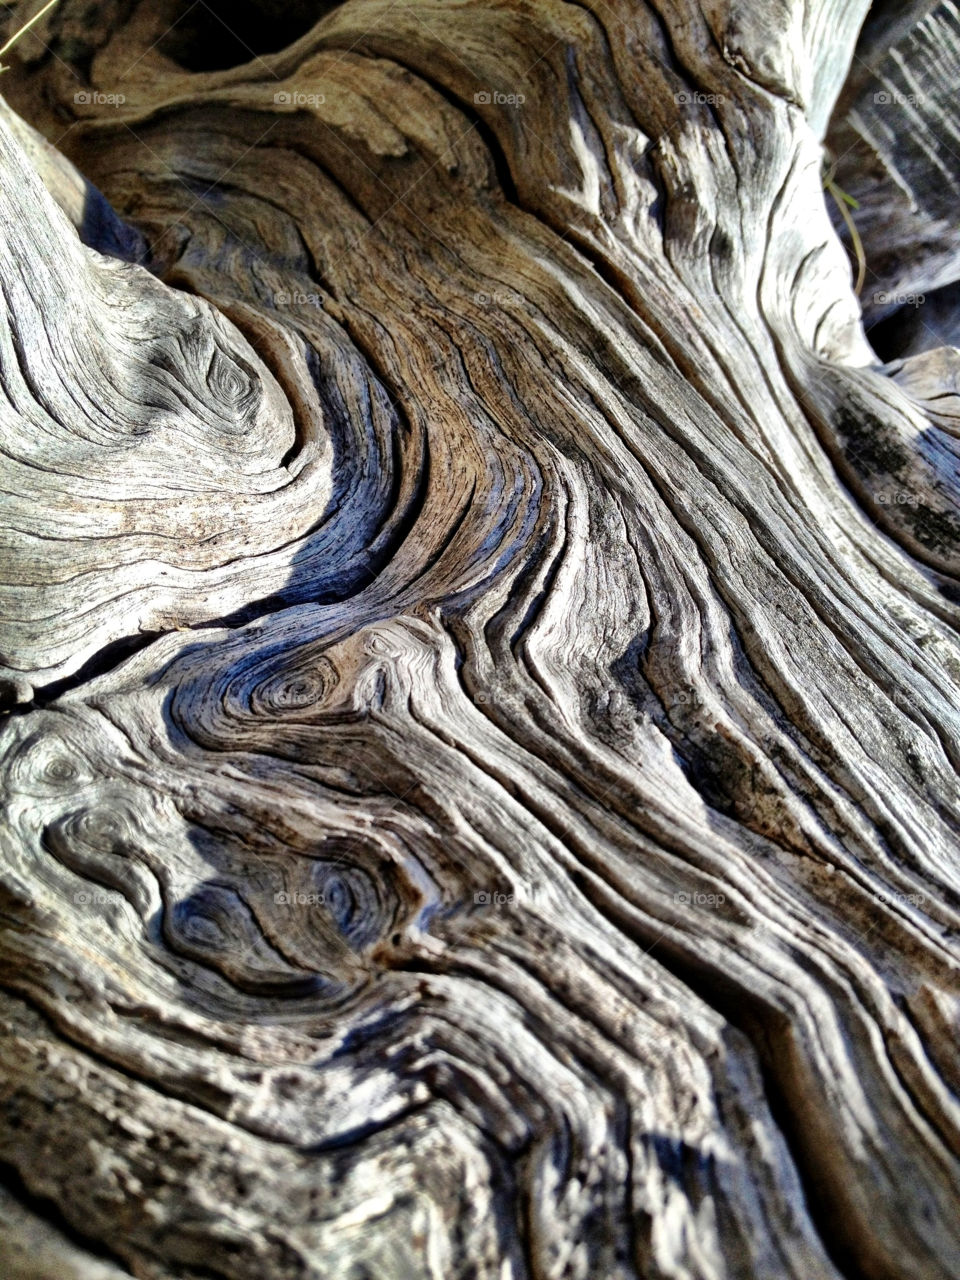 perth old tree old stump very old wood grain by gdyiudt